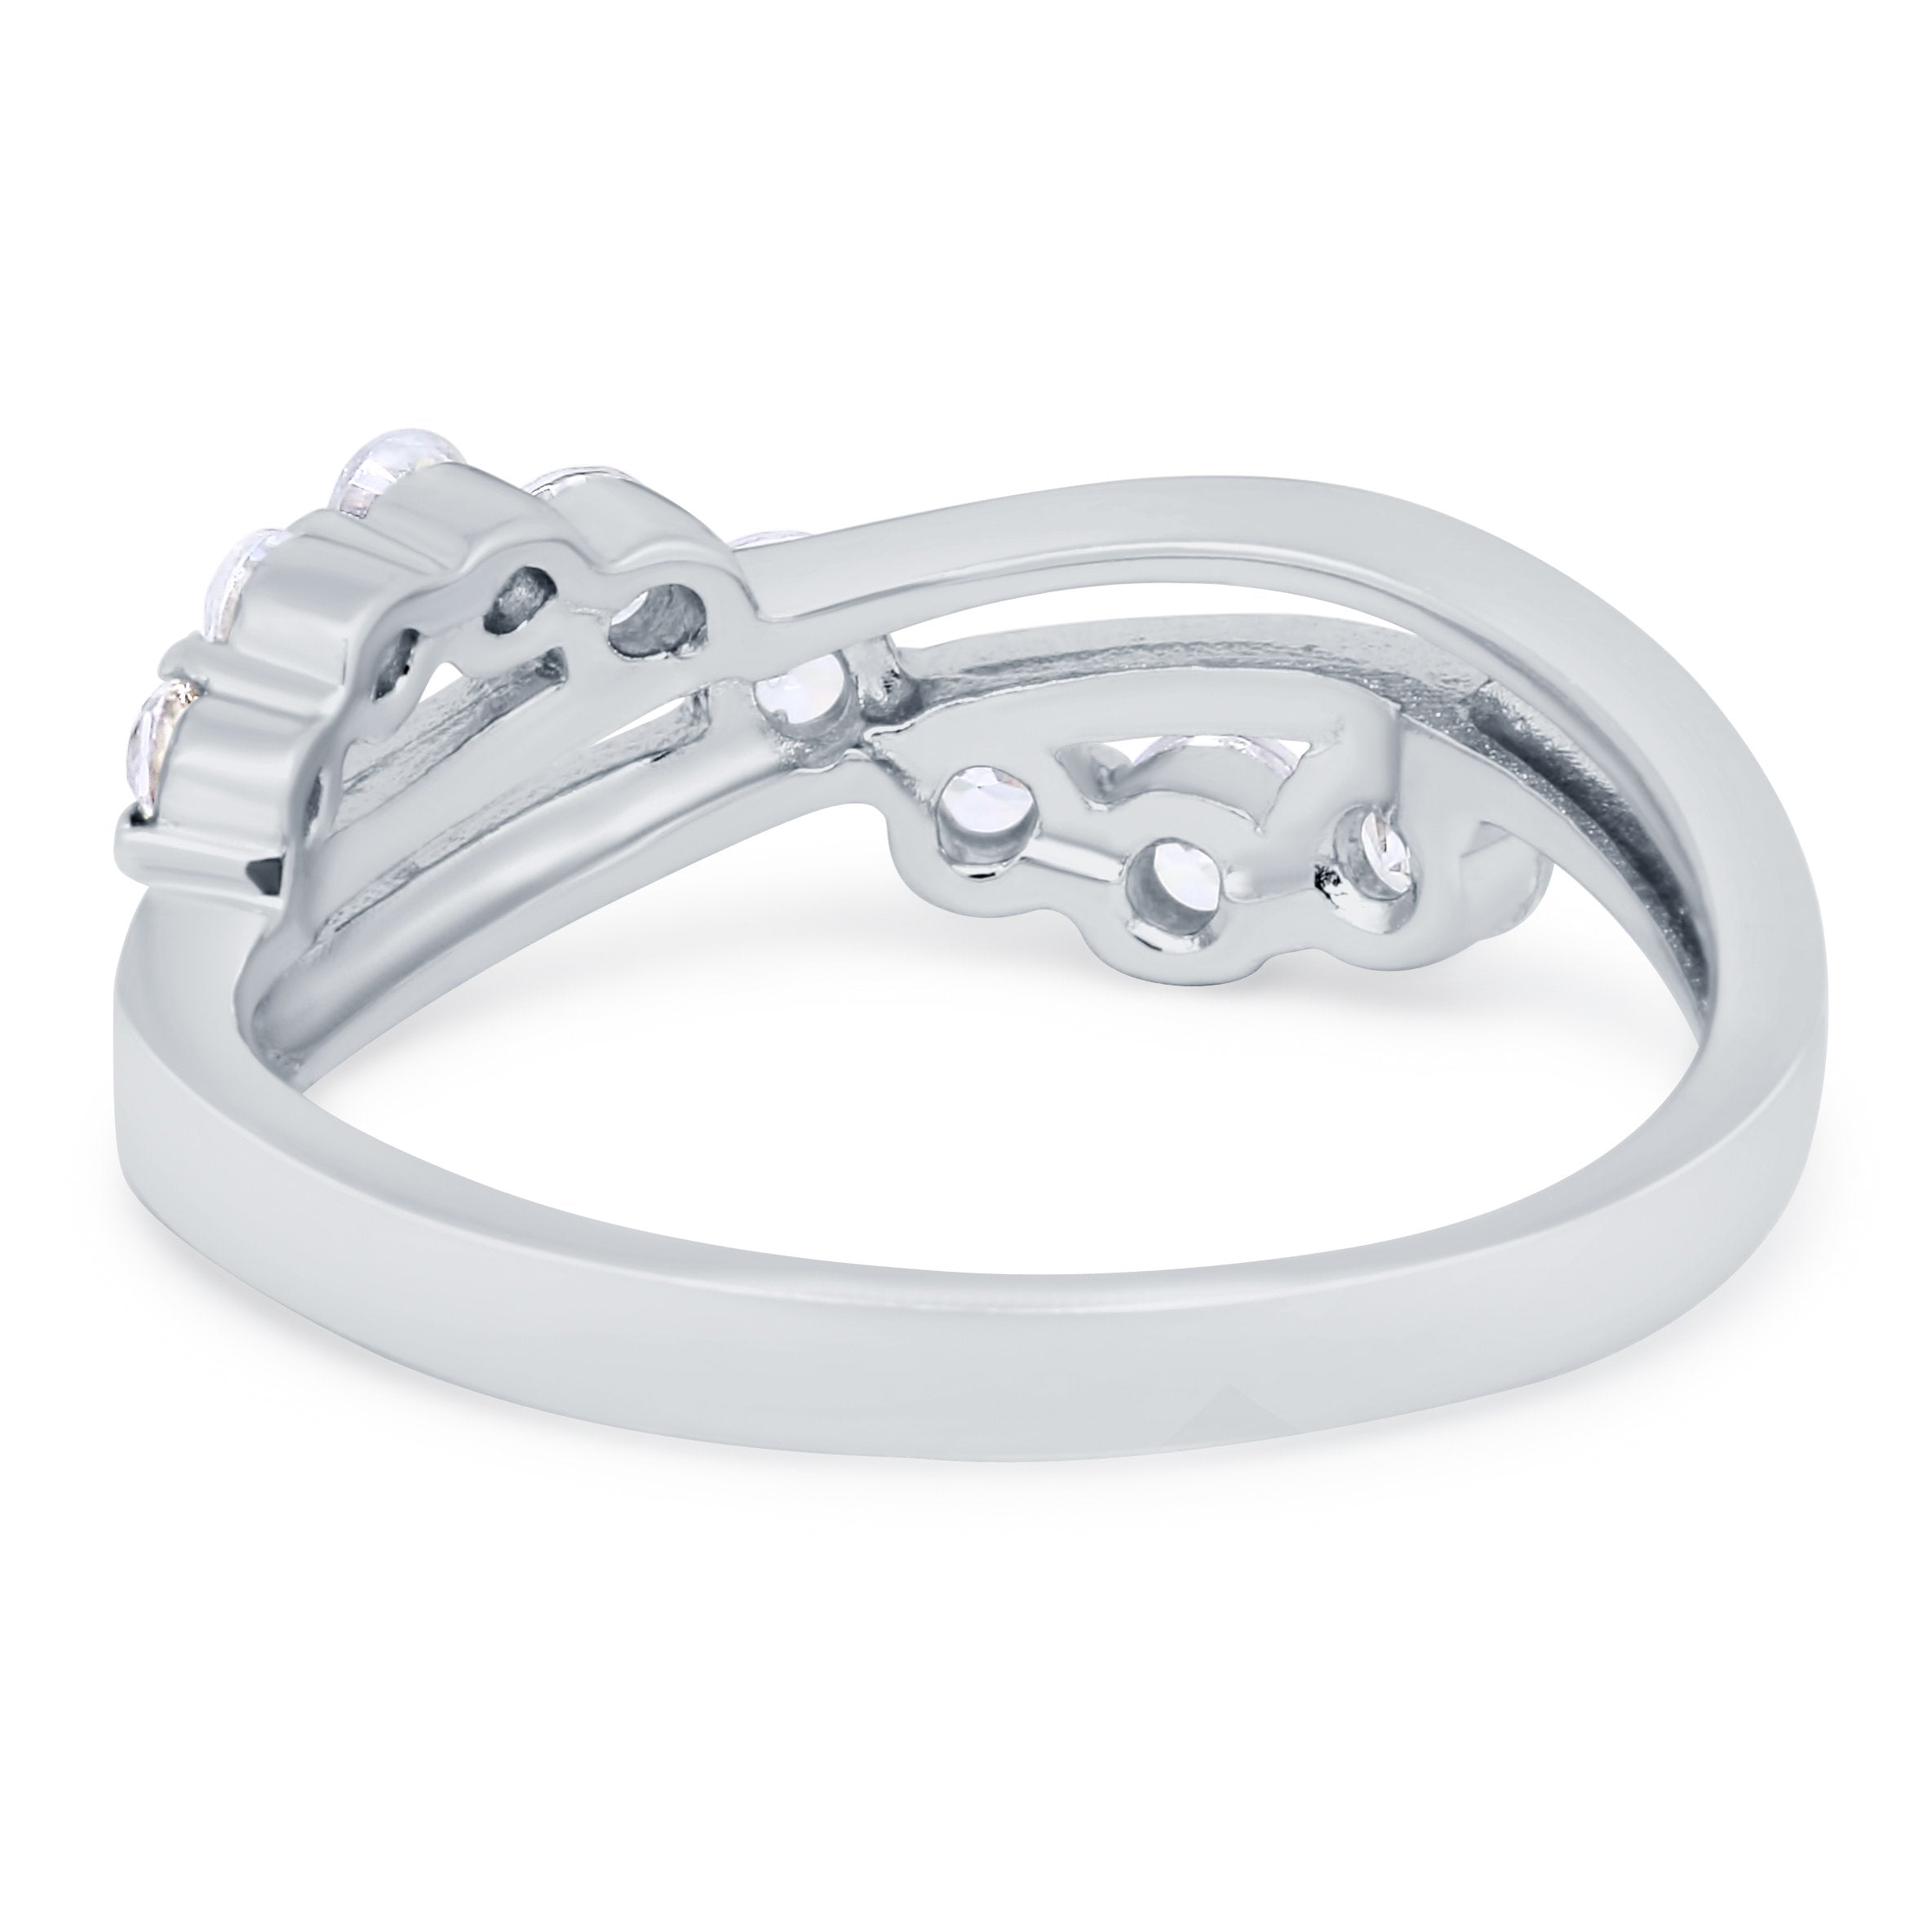 Journey Ring Round Eternity Simulated Cubic Zirconia 925 Sterling Silver